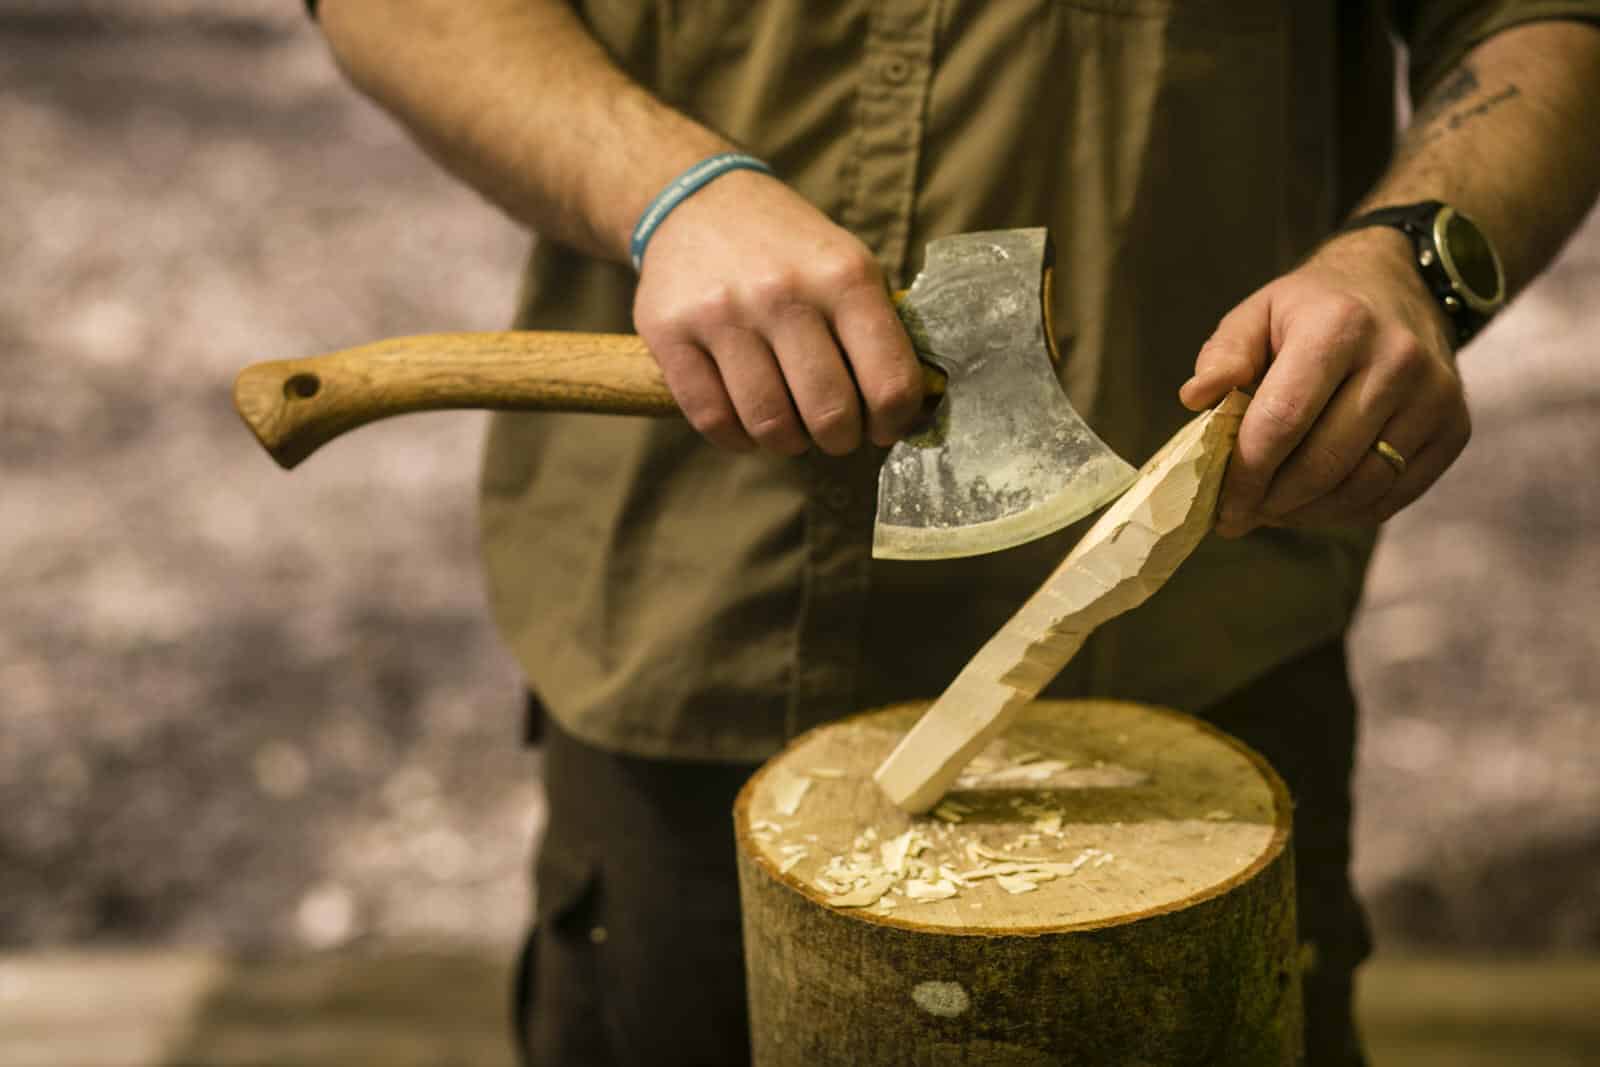 How to sharpen your Axe